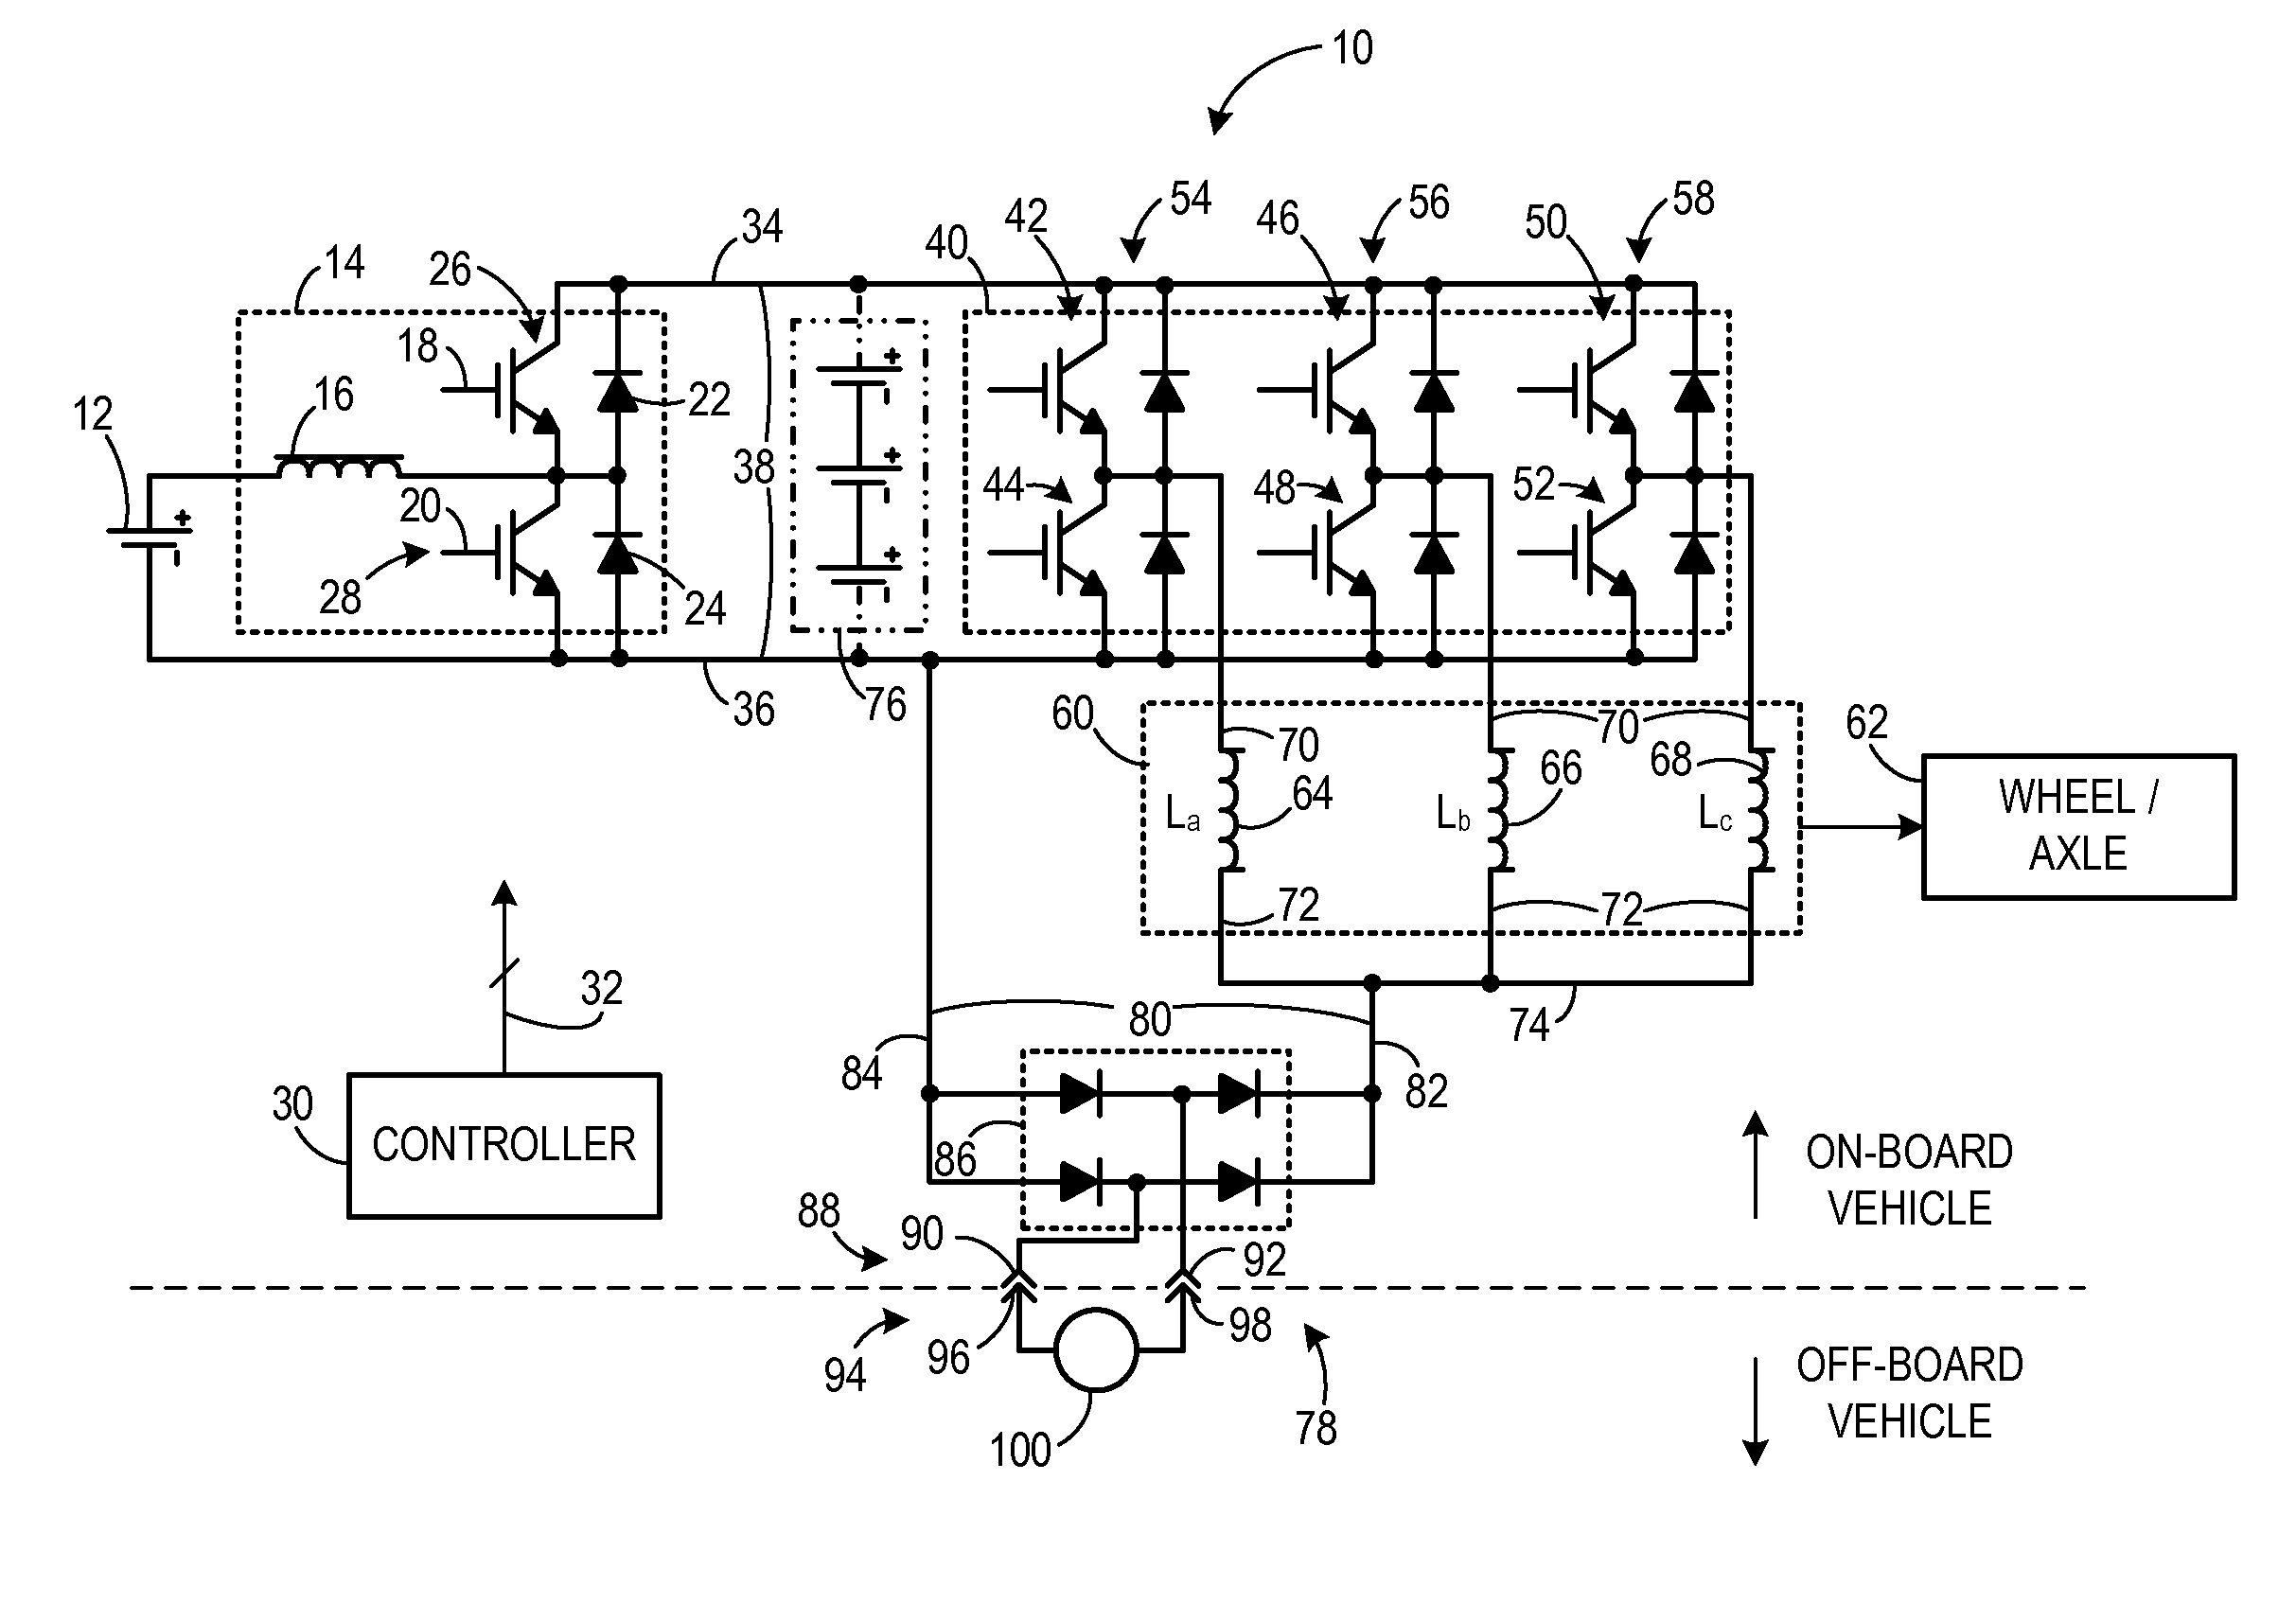 Apparatus for transferring energy using power electronics and machine inductance and method of manufacturing same